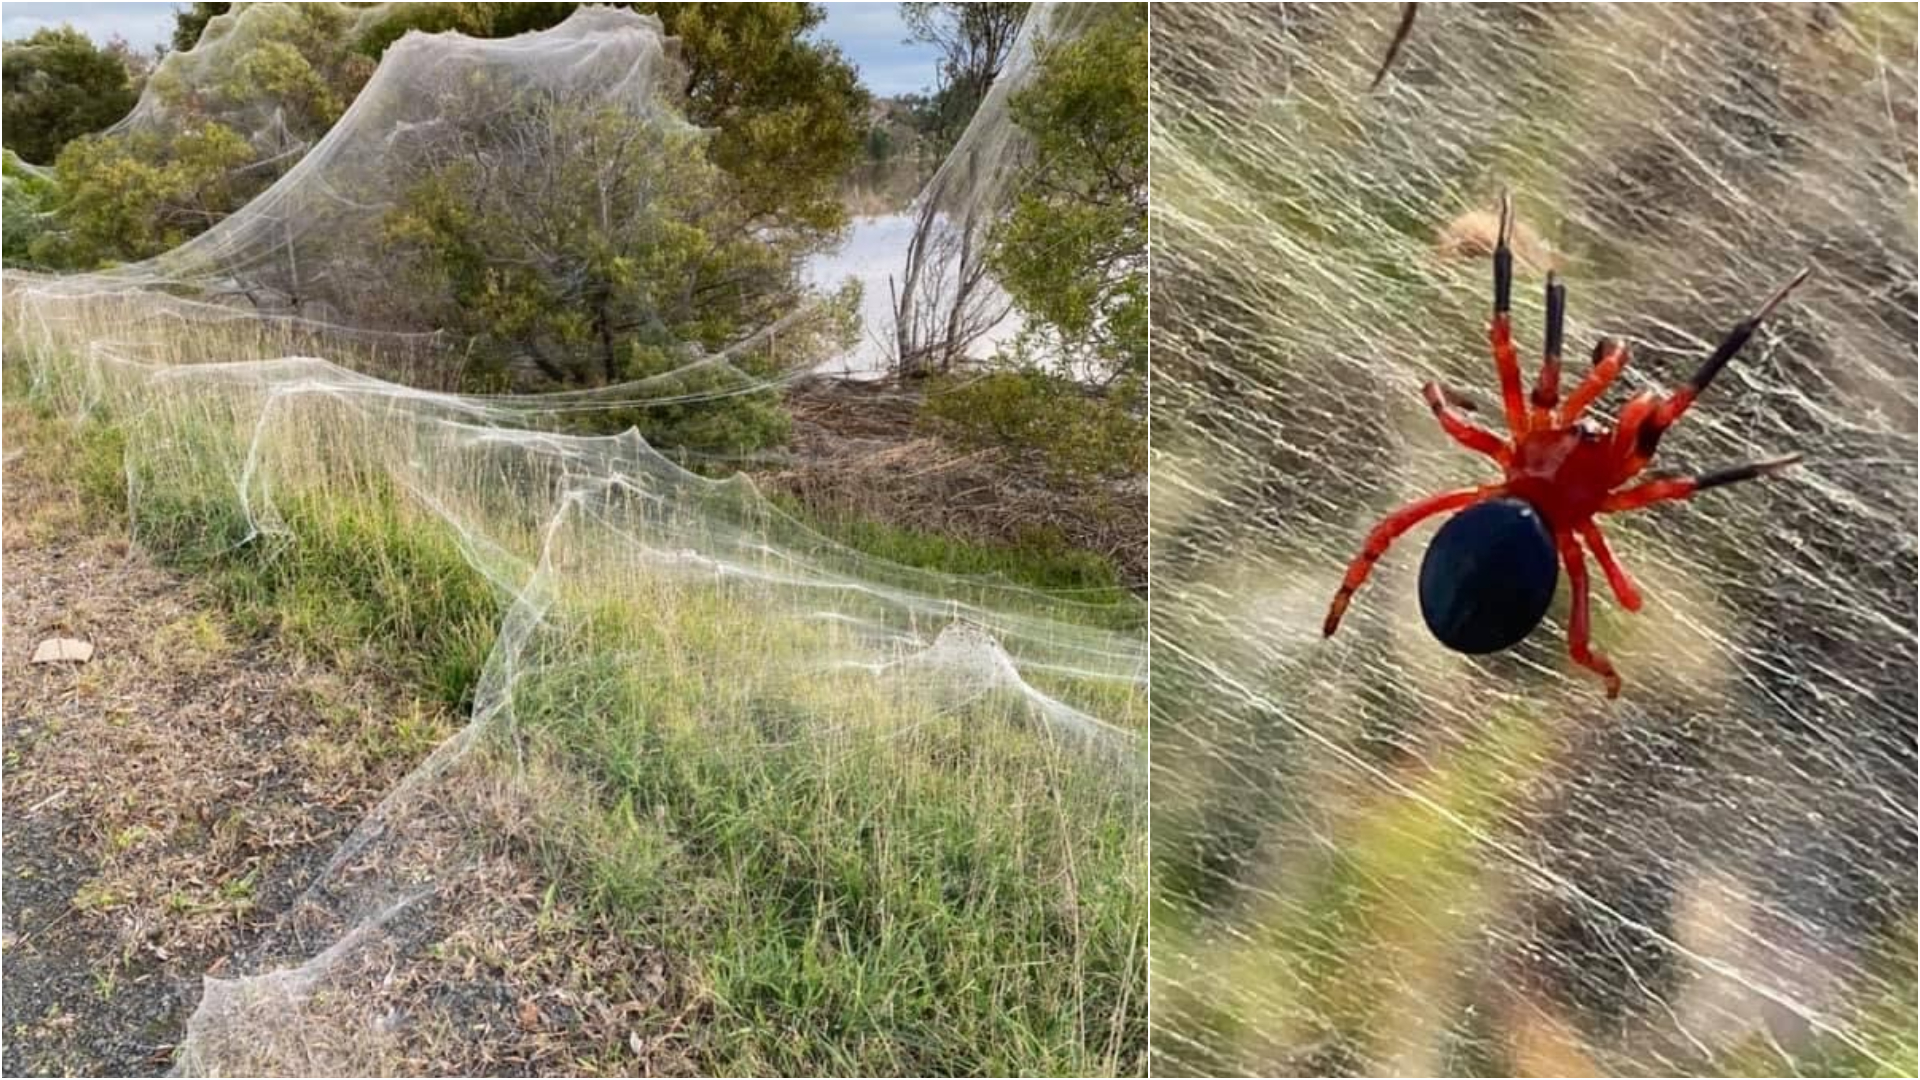 Spider apocalypse' hits Australia covering countryside in eerie blankets of  cobwebs after biblical mouse plague